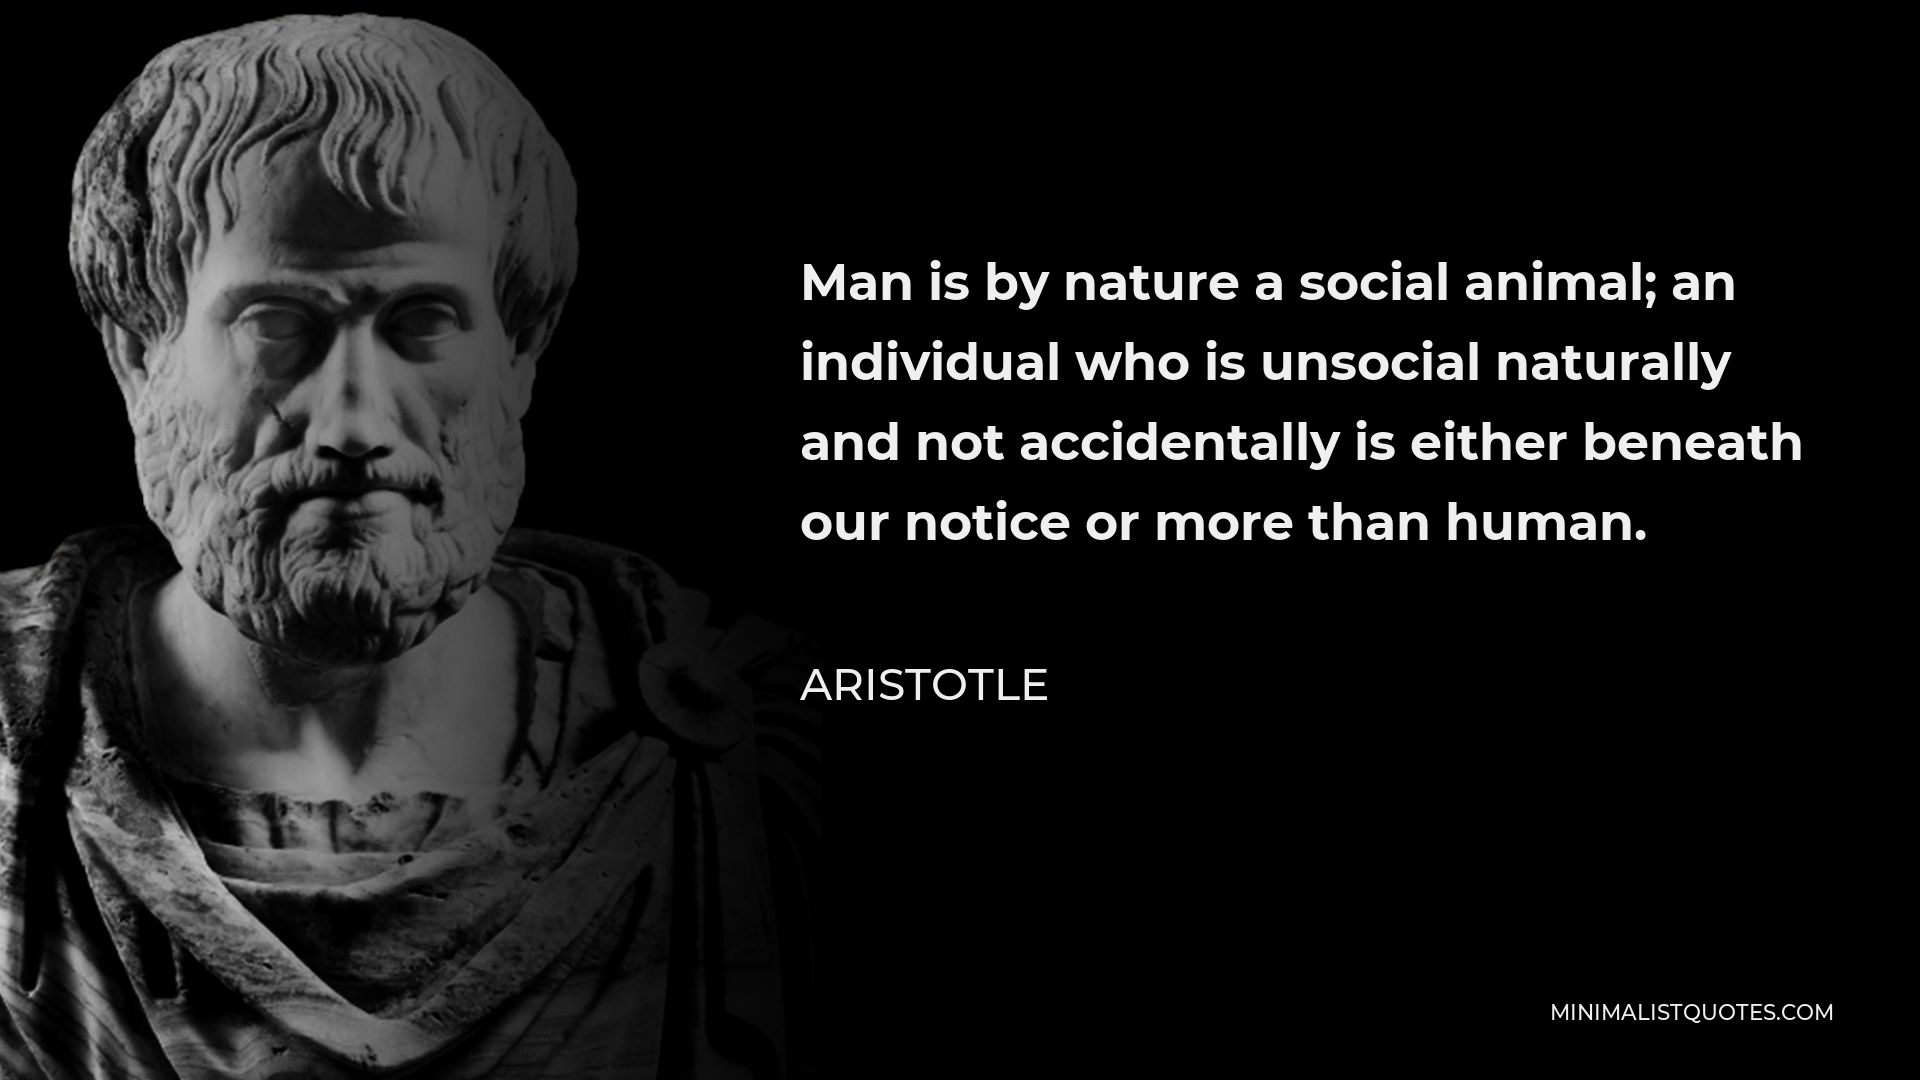 Aristotle Quote: Man is by nature a social animal; an individual who is  unsocial naturally and not accidentally is either beneath our notice or  more than human.